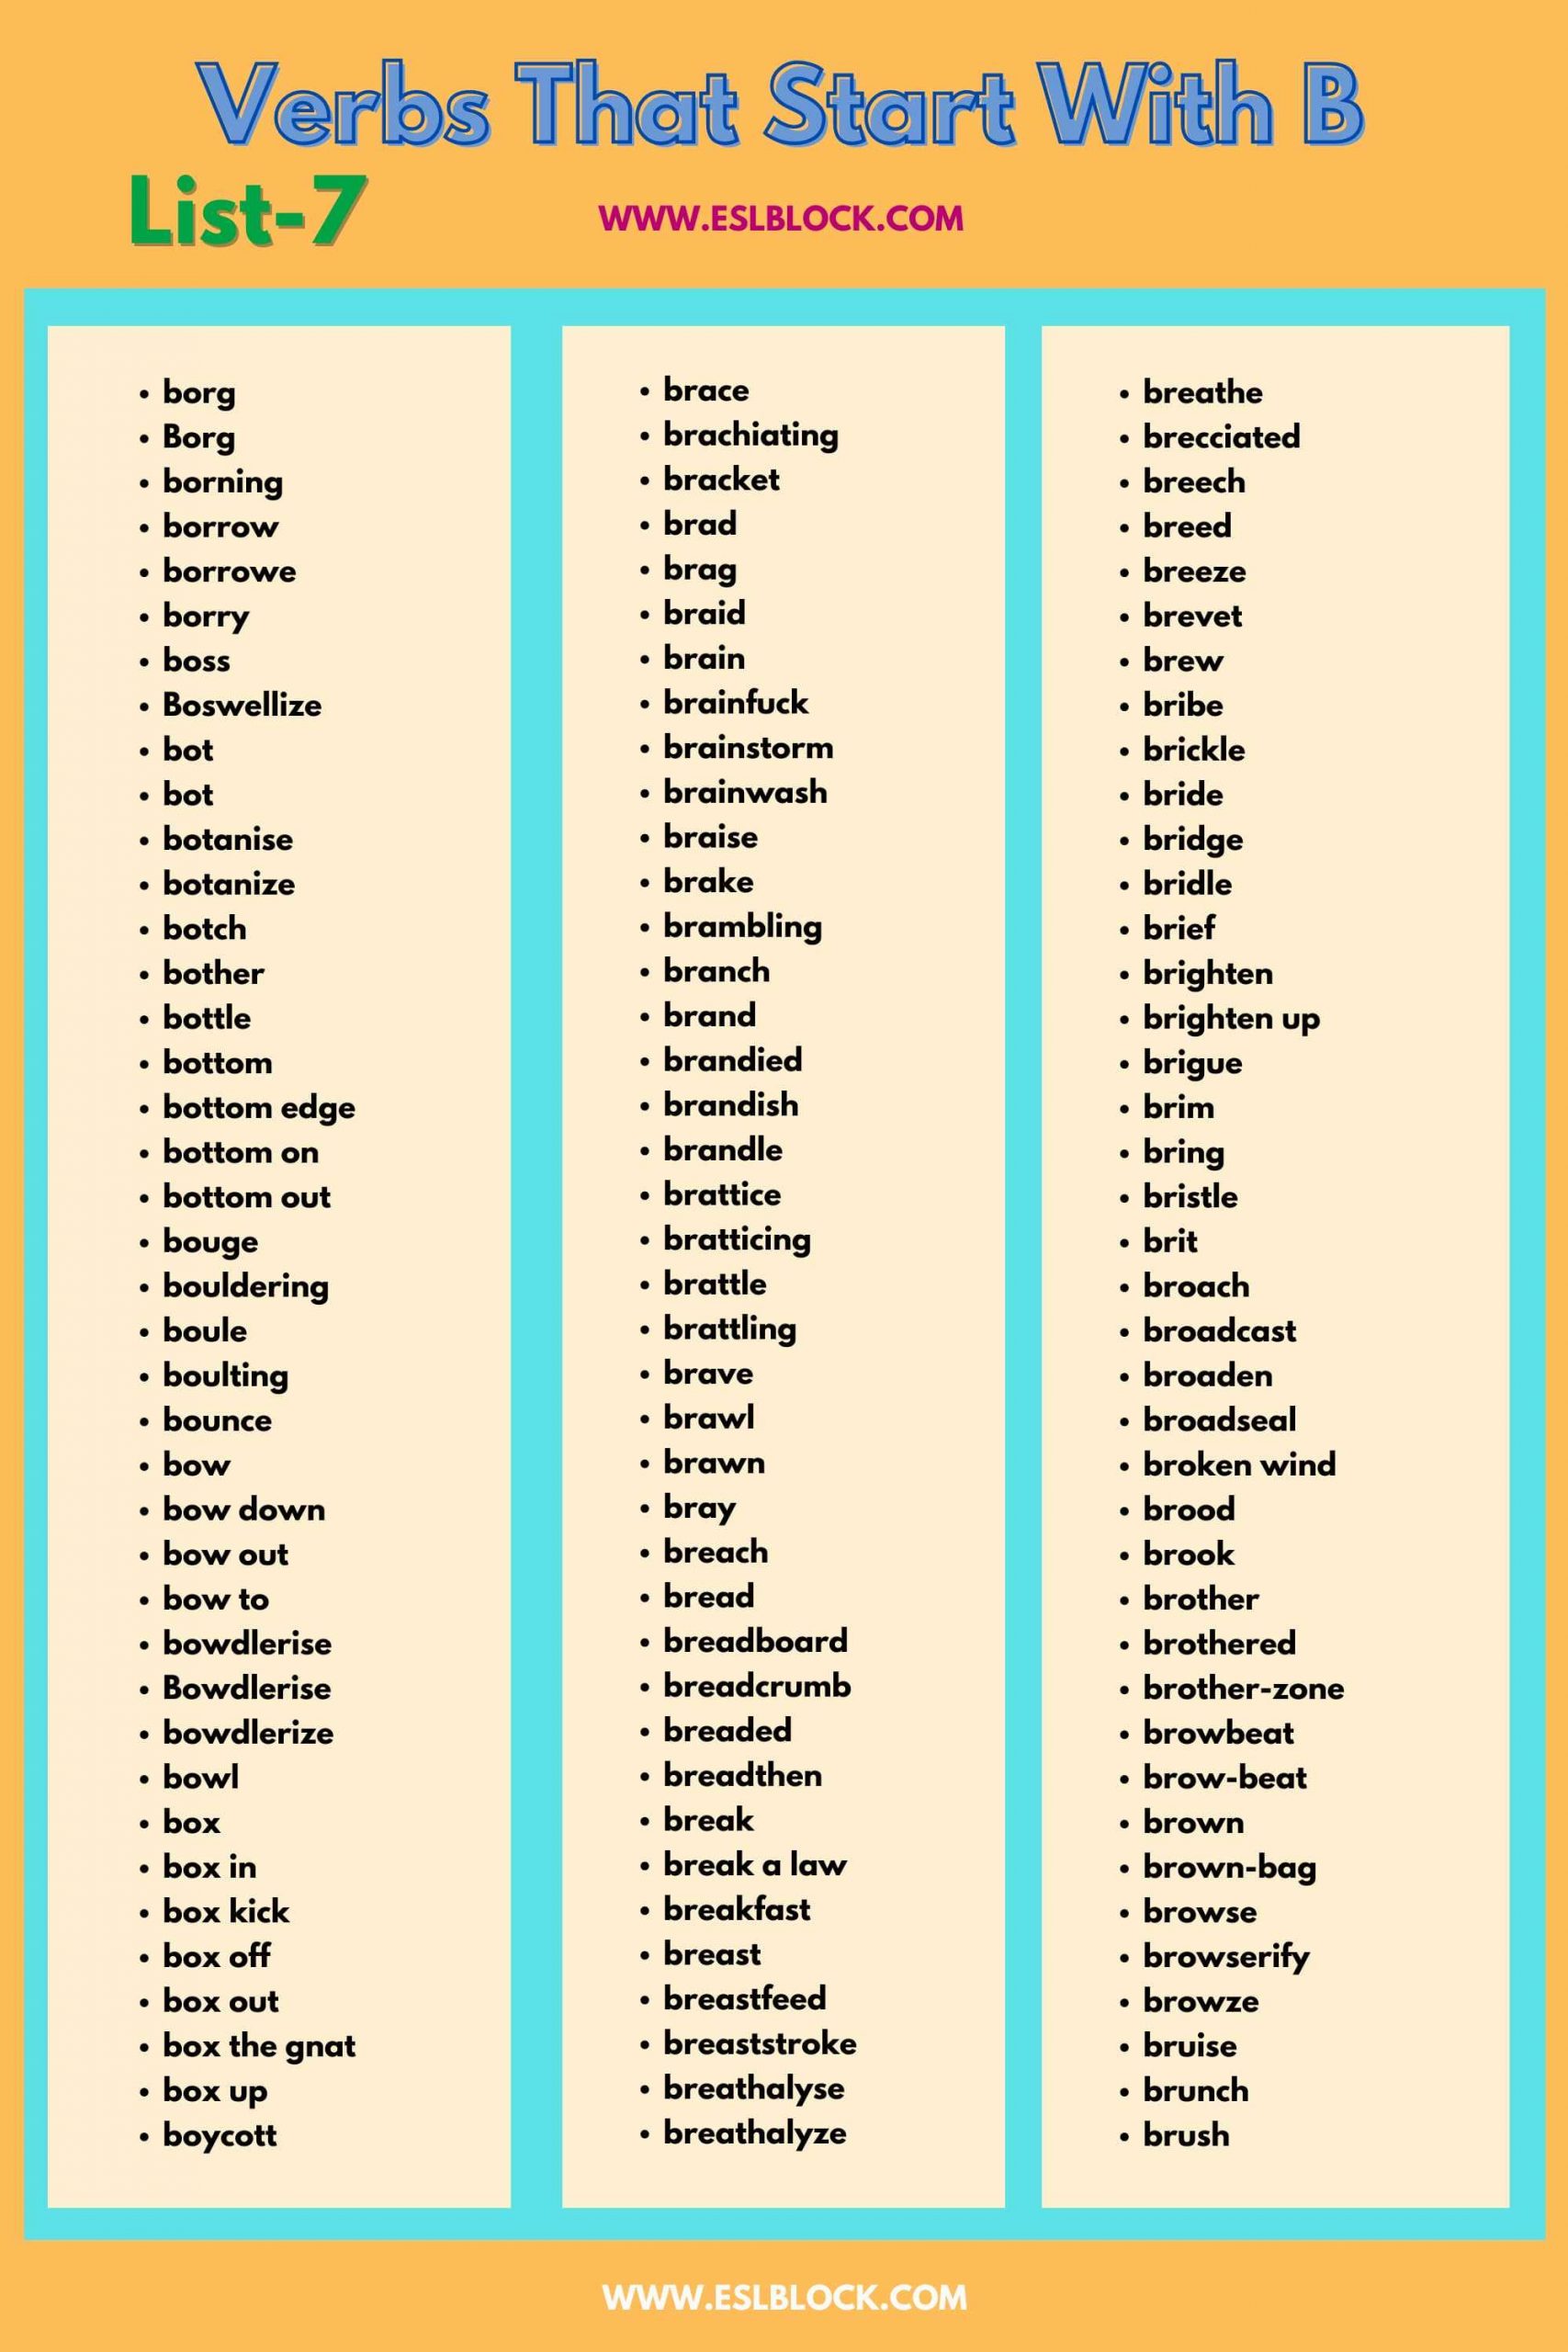 4 Letter Verbs, 5 Letter Verbs Starting With B, Action Words, Action Words That Start With B, B Action Words, B Verbs, B Verbs in English, English, English Grammar, English Vocabulary, English Words, List of Verbs That Start With B, Verbs List, Verbs That Start With B, Vocabulary, Words That Start With B4 Letter Verbs, 5 Letter Verbs Starting With B, Action Words, Action Words That Start With B, B Action Words, B Verbs, B Verbs in English, English, English Grammar, English Vocabulary, English Words, List of Verbs That Start With B, Verbs List, Verbs That Start With B, Vocabulary, Words That Start With B